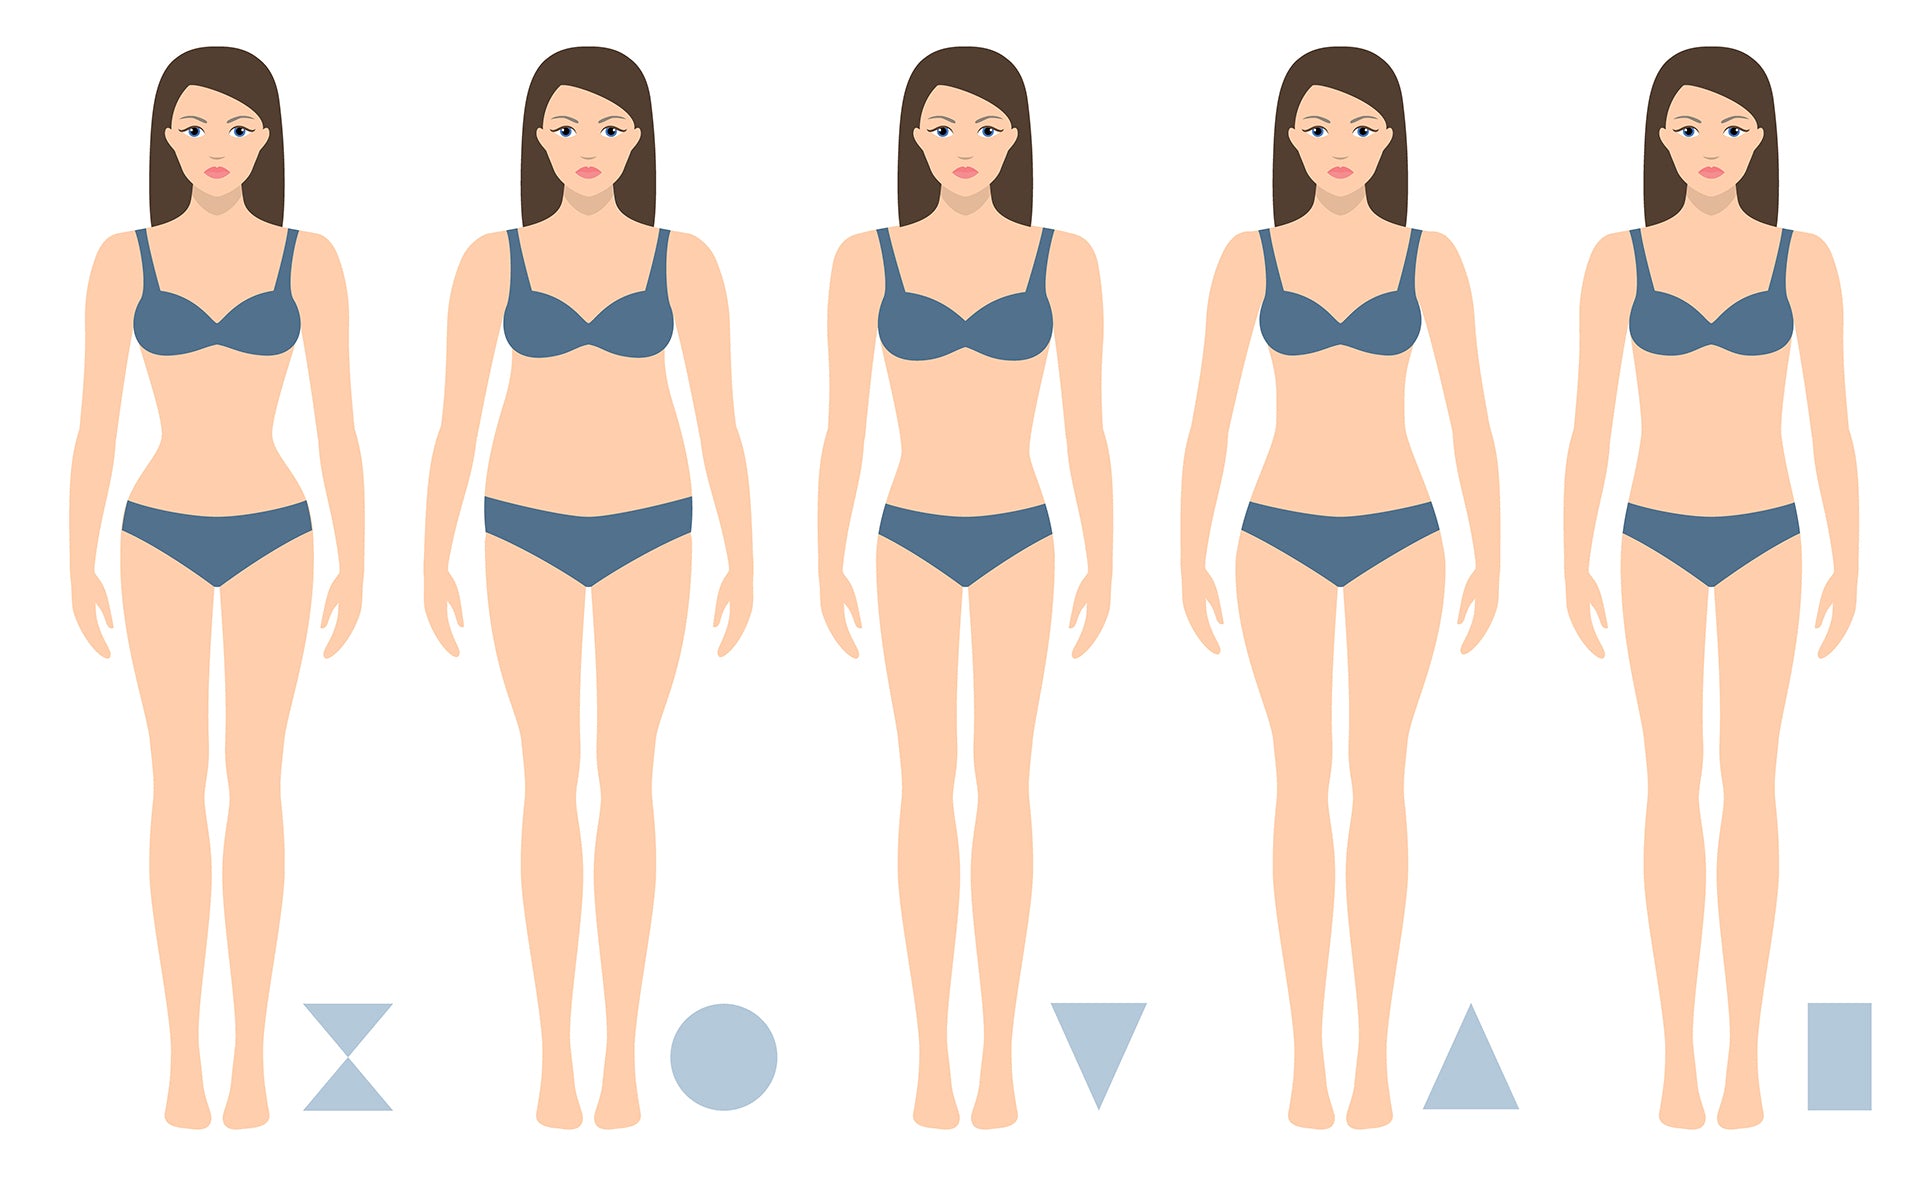 HOW TO CHOOSE THE RIGHT BIKINI FOR YOUR BODY TYPE